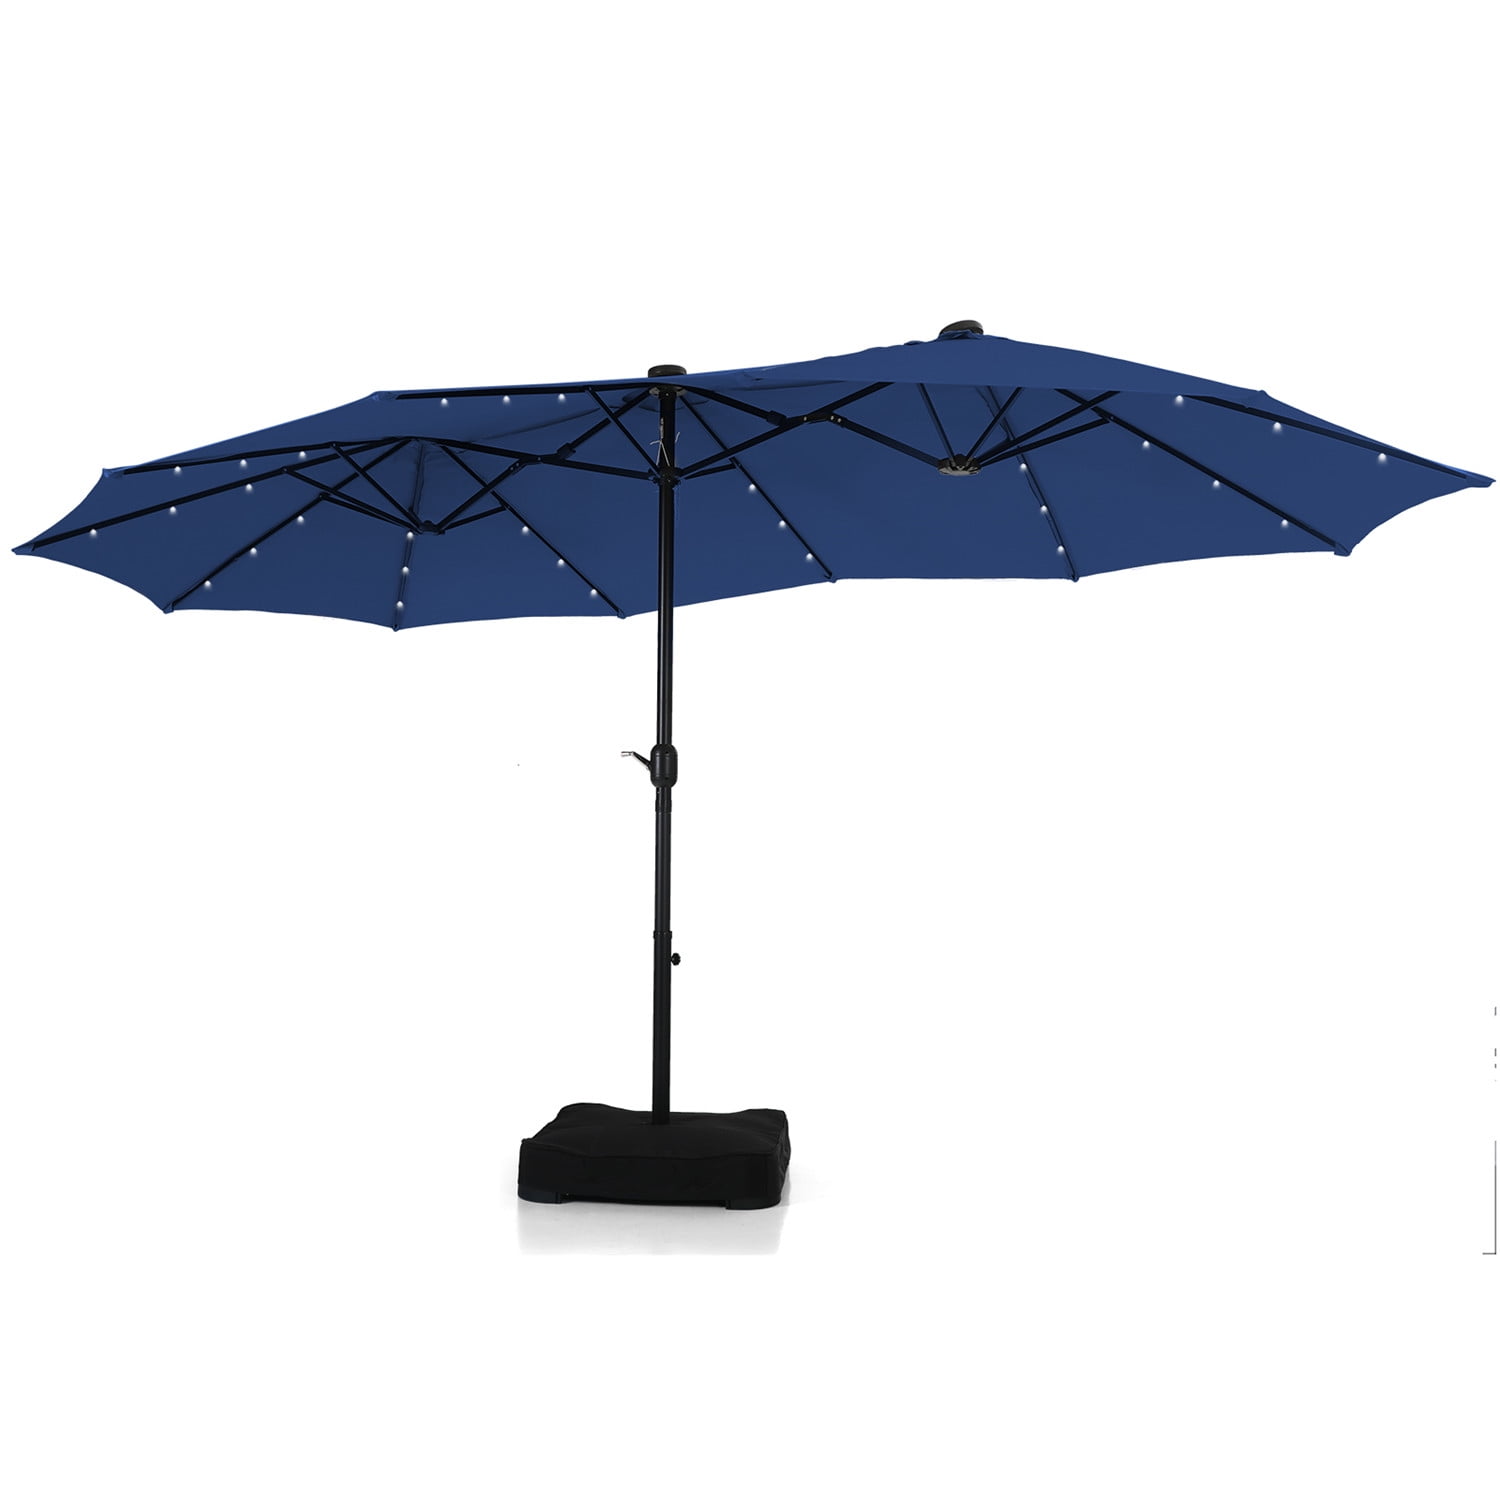 Details about   15Ft Patio Double-Sided Solar Powered Market Umbrella 36 LED Lights with Base 